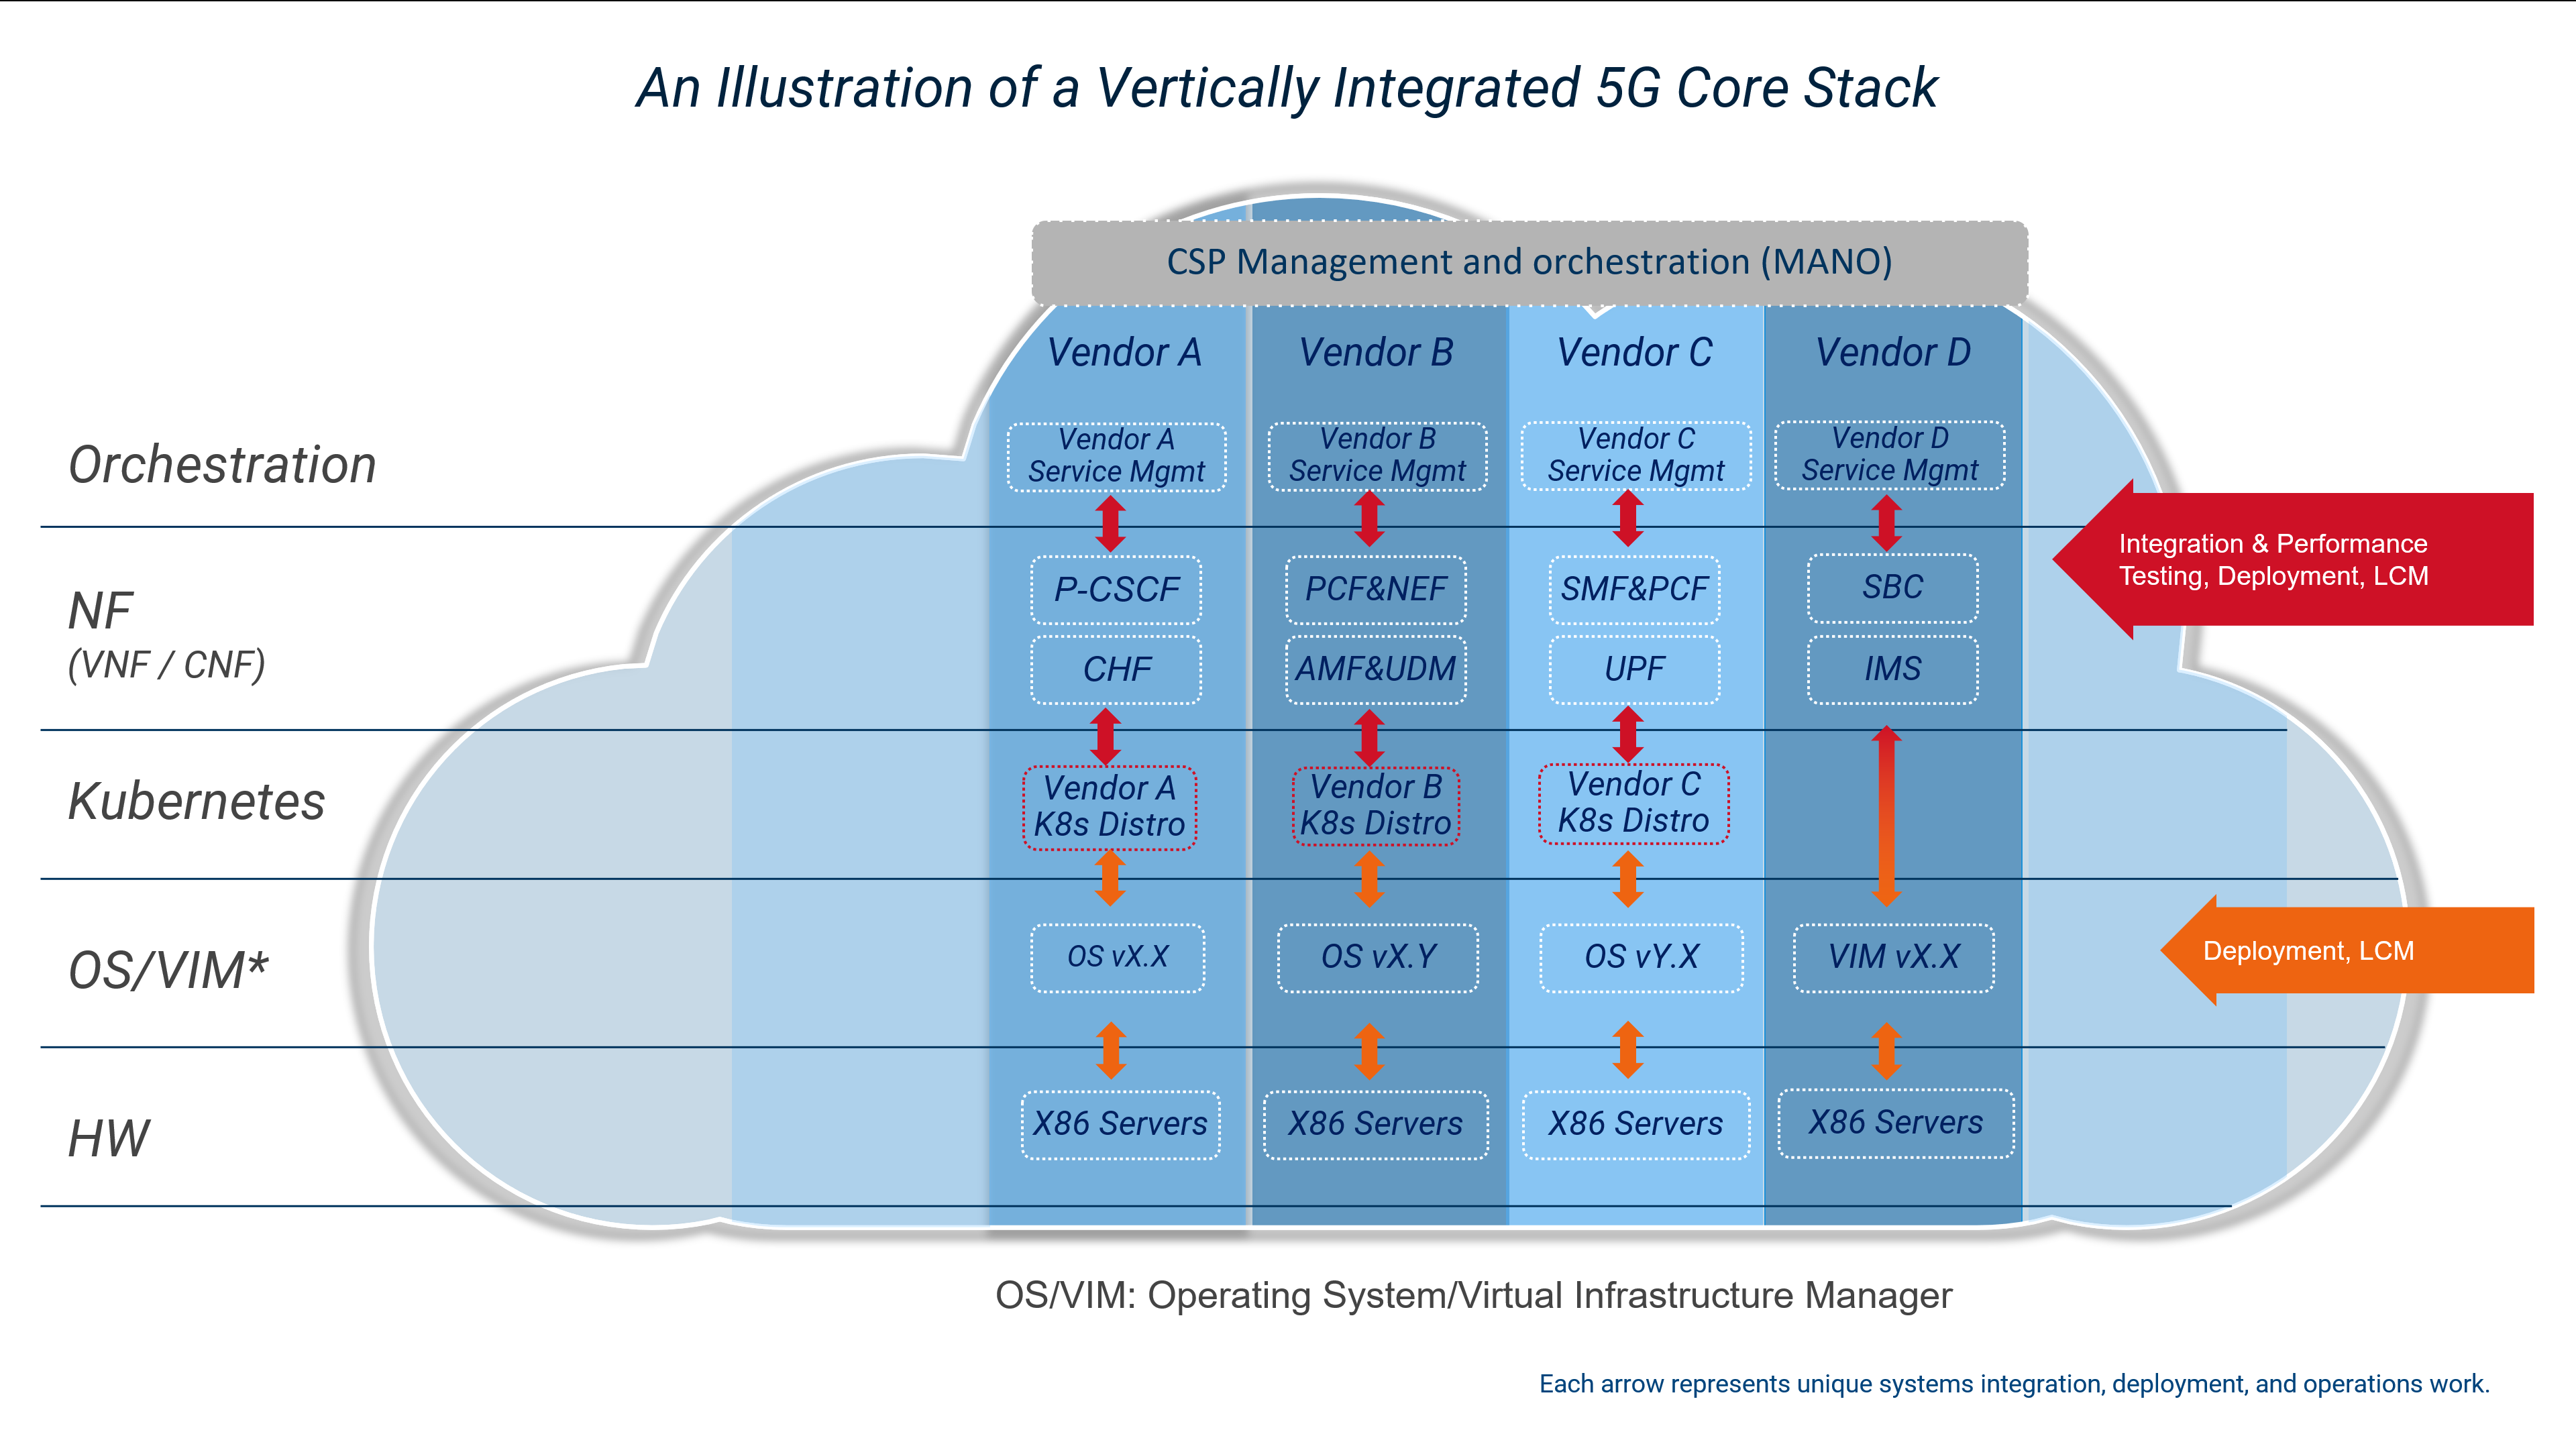 Vertically integrated 5G Core stack on a telco cloud